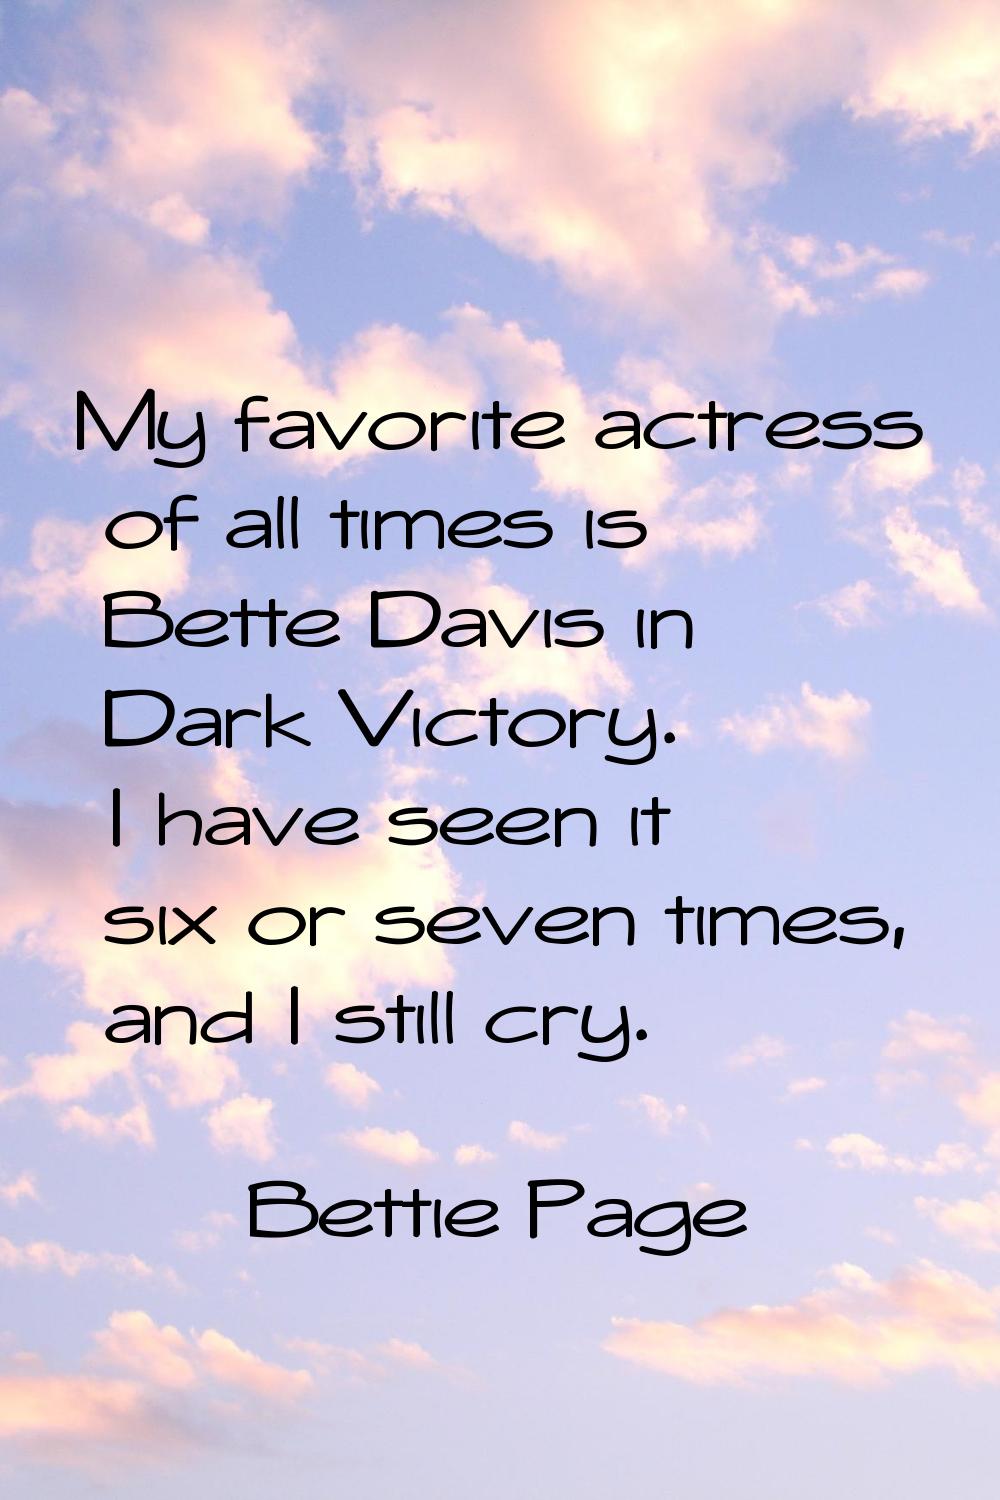 My favorite actress of all times is Bette Davis in Dark Victory. I have seen it six or seven times,